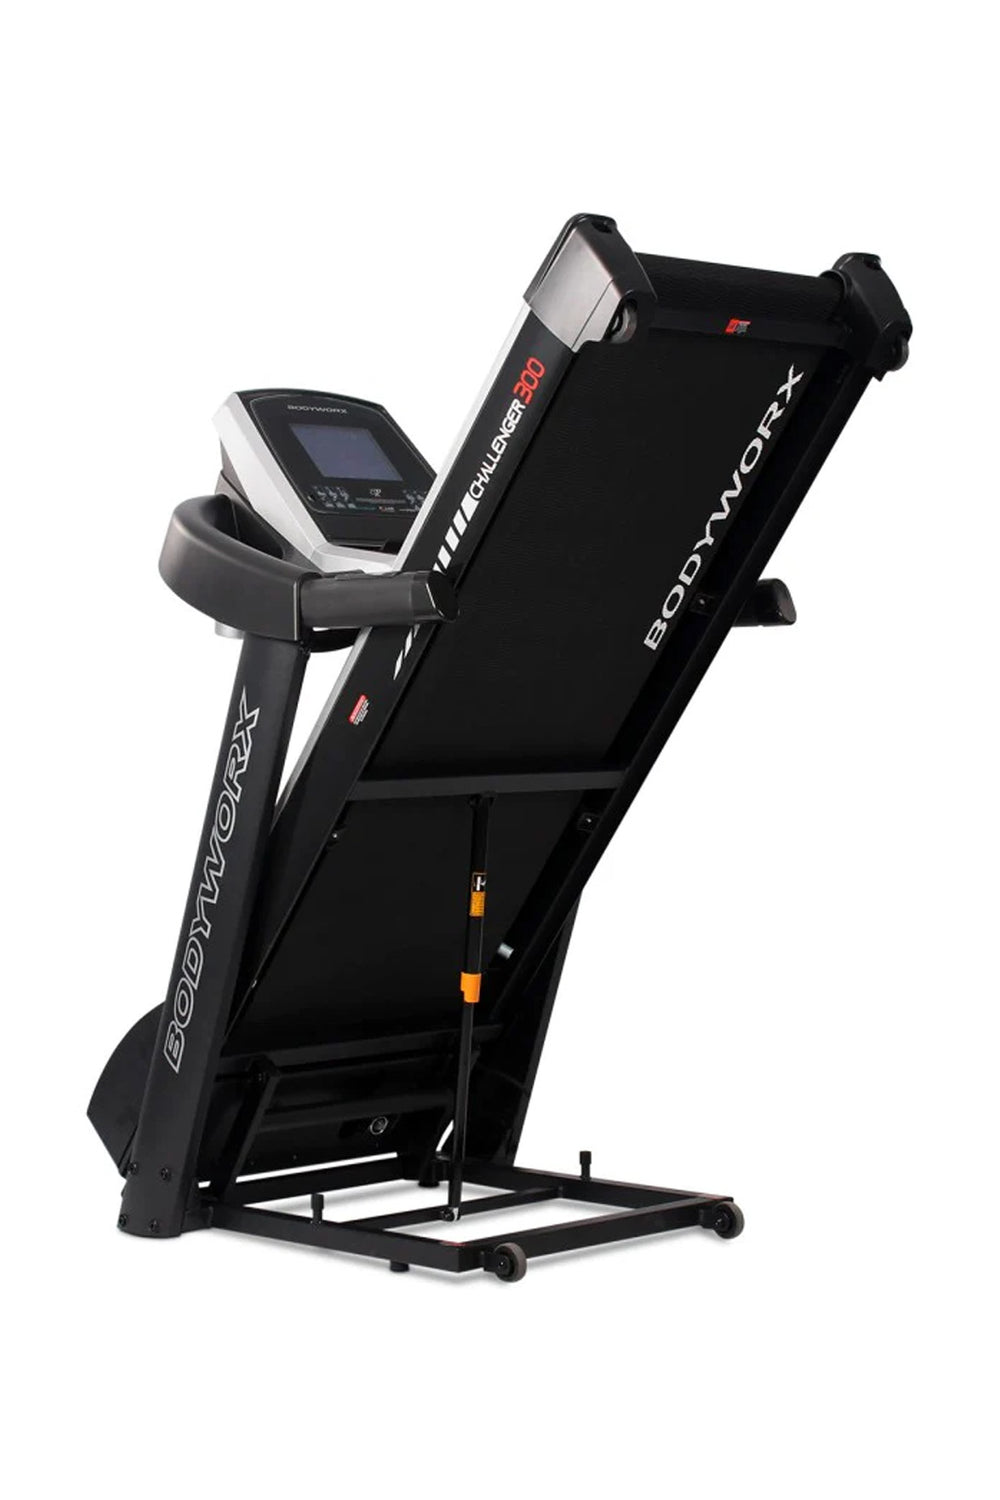 Bodyworx Challenger Treadmill in it's folded, compact form